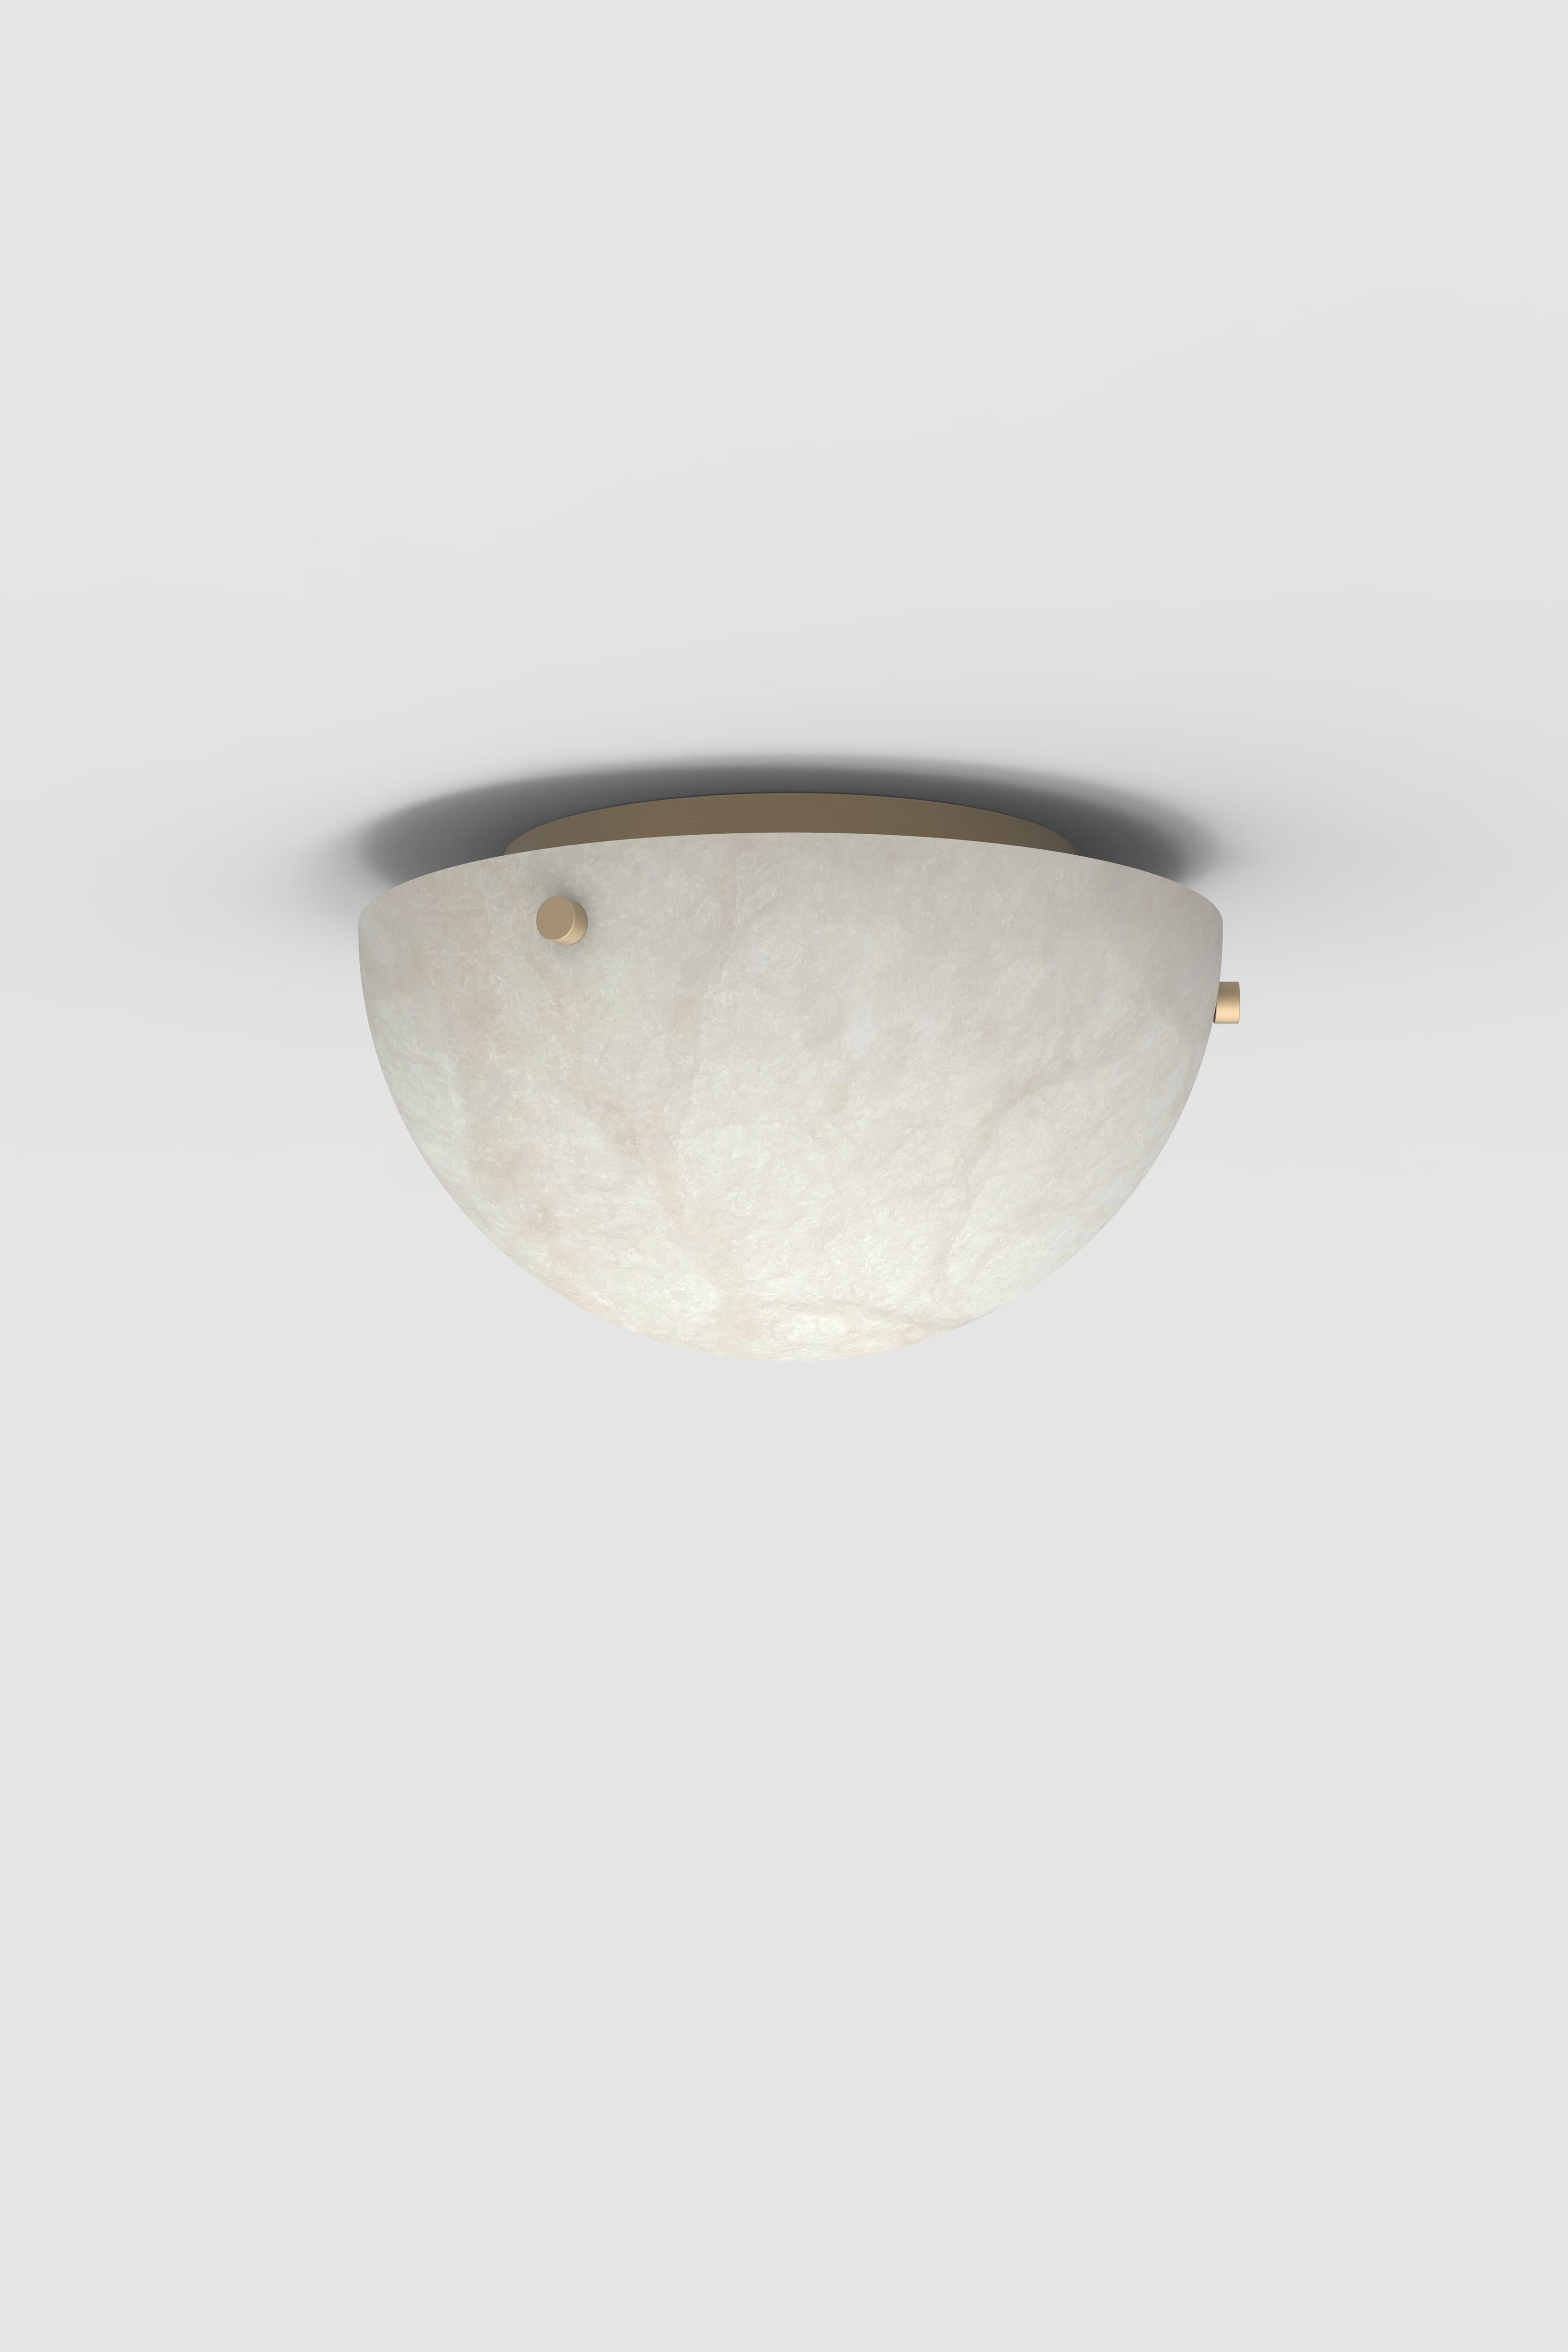 Blackened Contemporary Porta Flush Mount 301A in Alabaster by Orphan Work For Sale